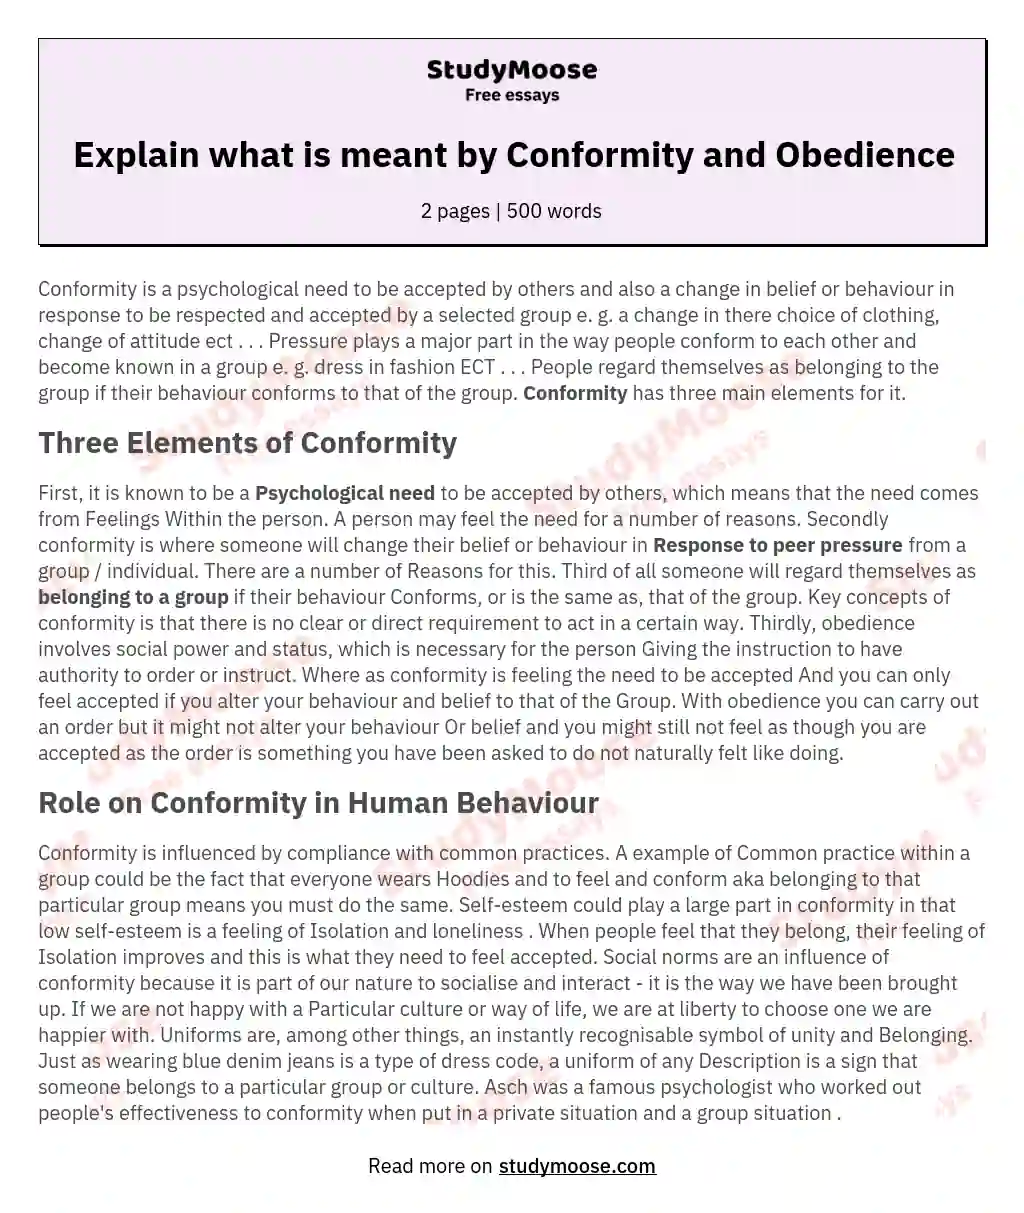 Explain what is meant by Conformity and Obedience essay